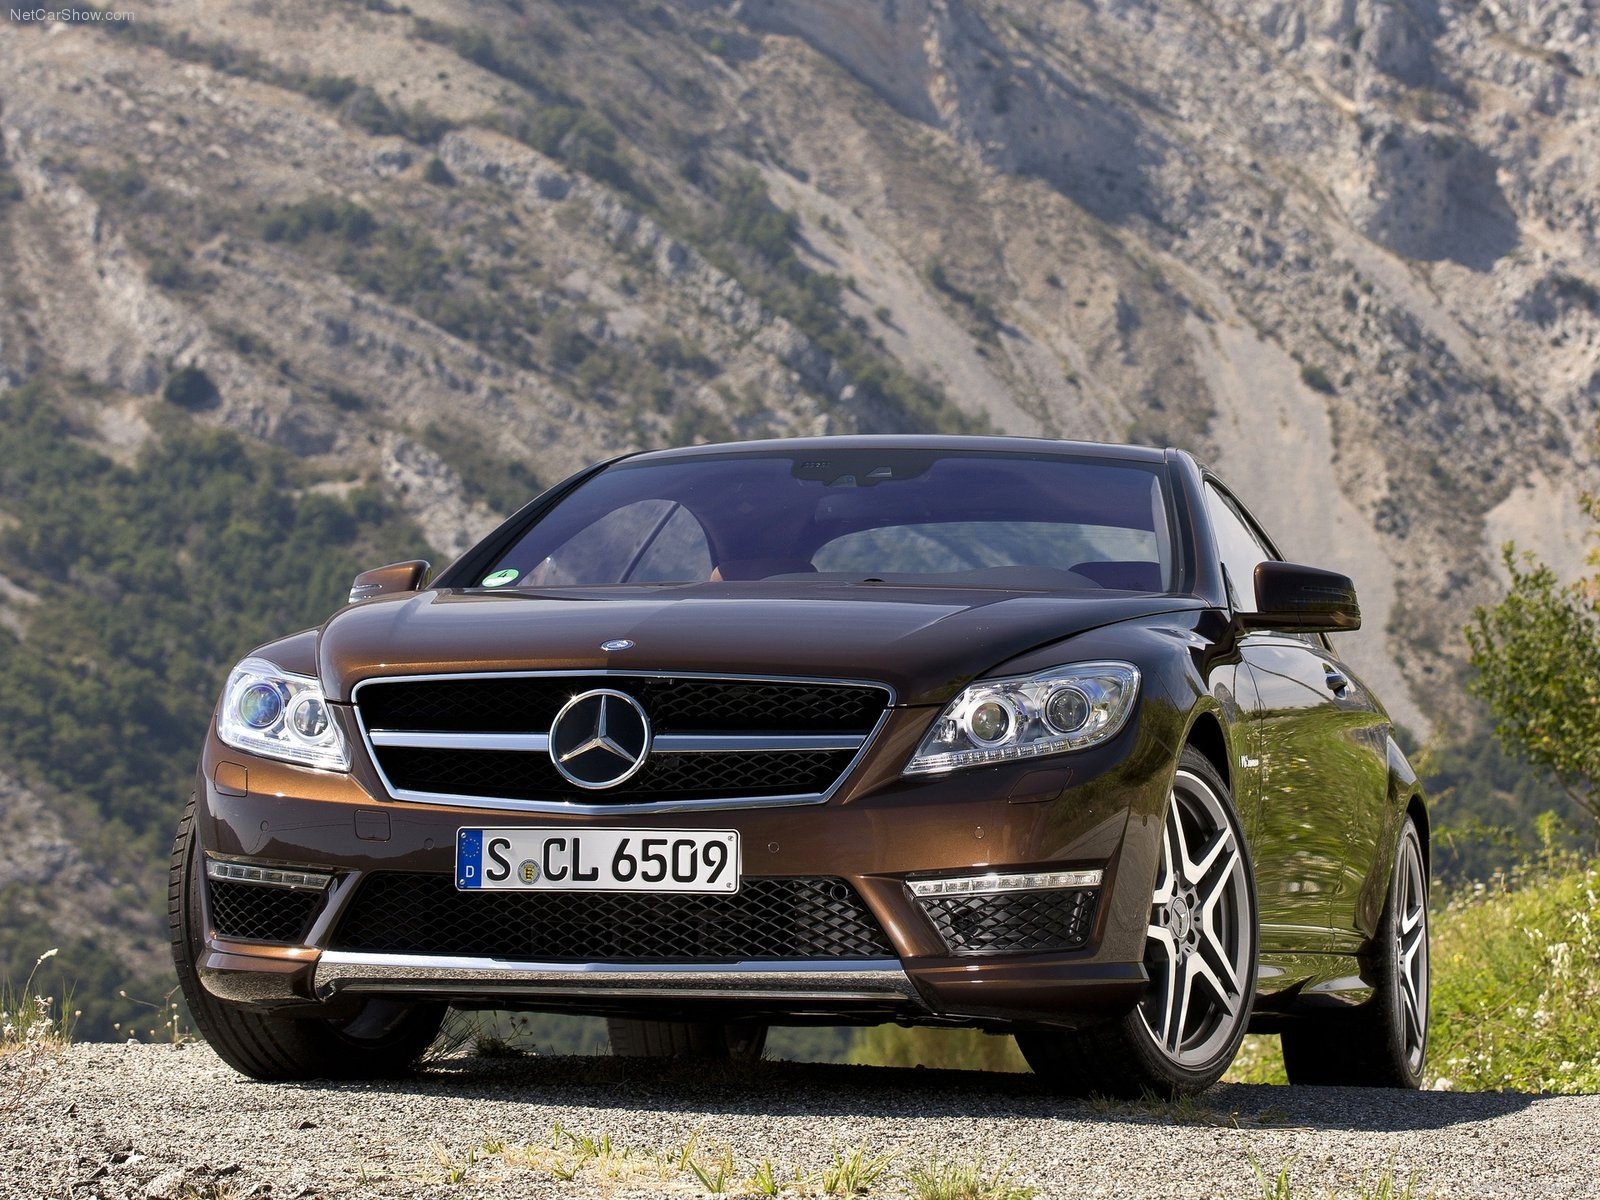 cars, Amg, Mercedes benz Wallpapers HD / Desktop and Mobile Backgrounds